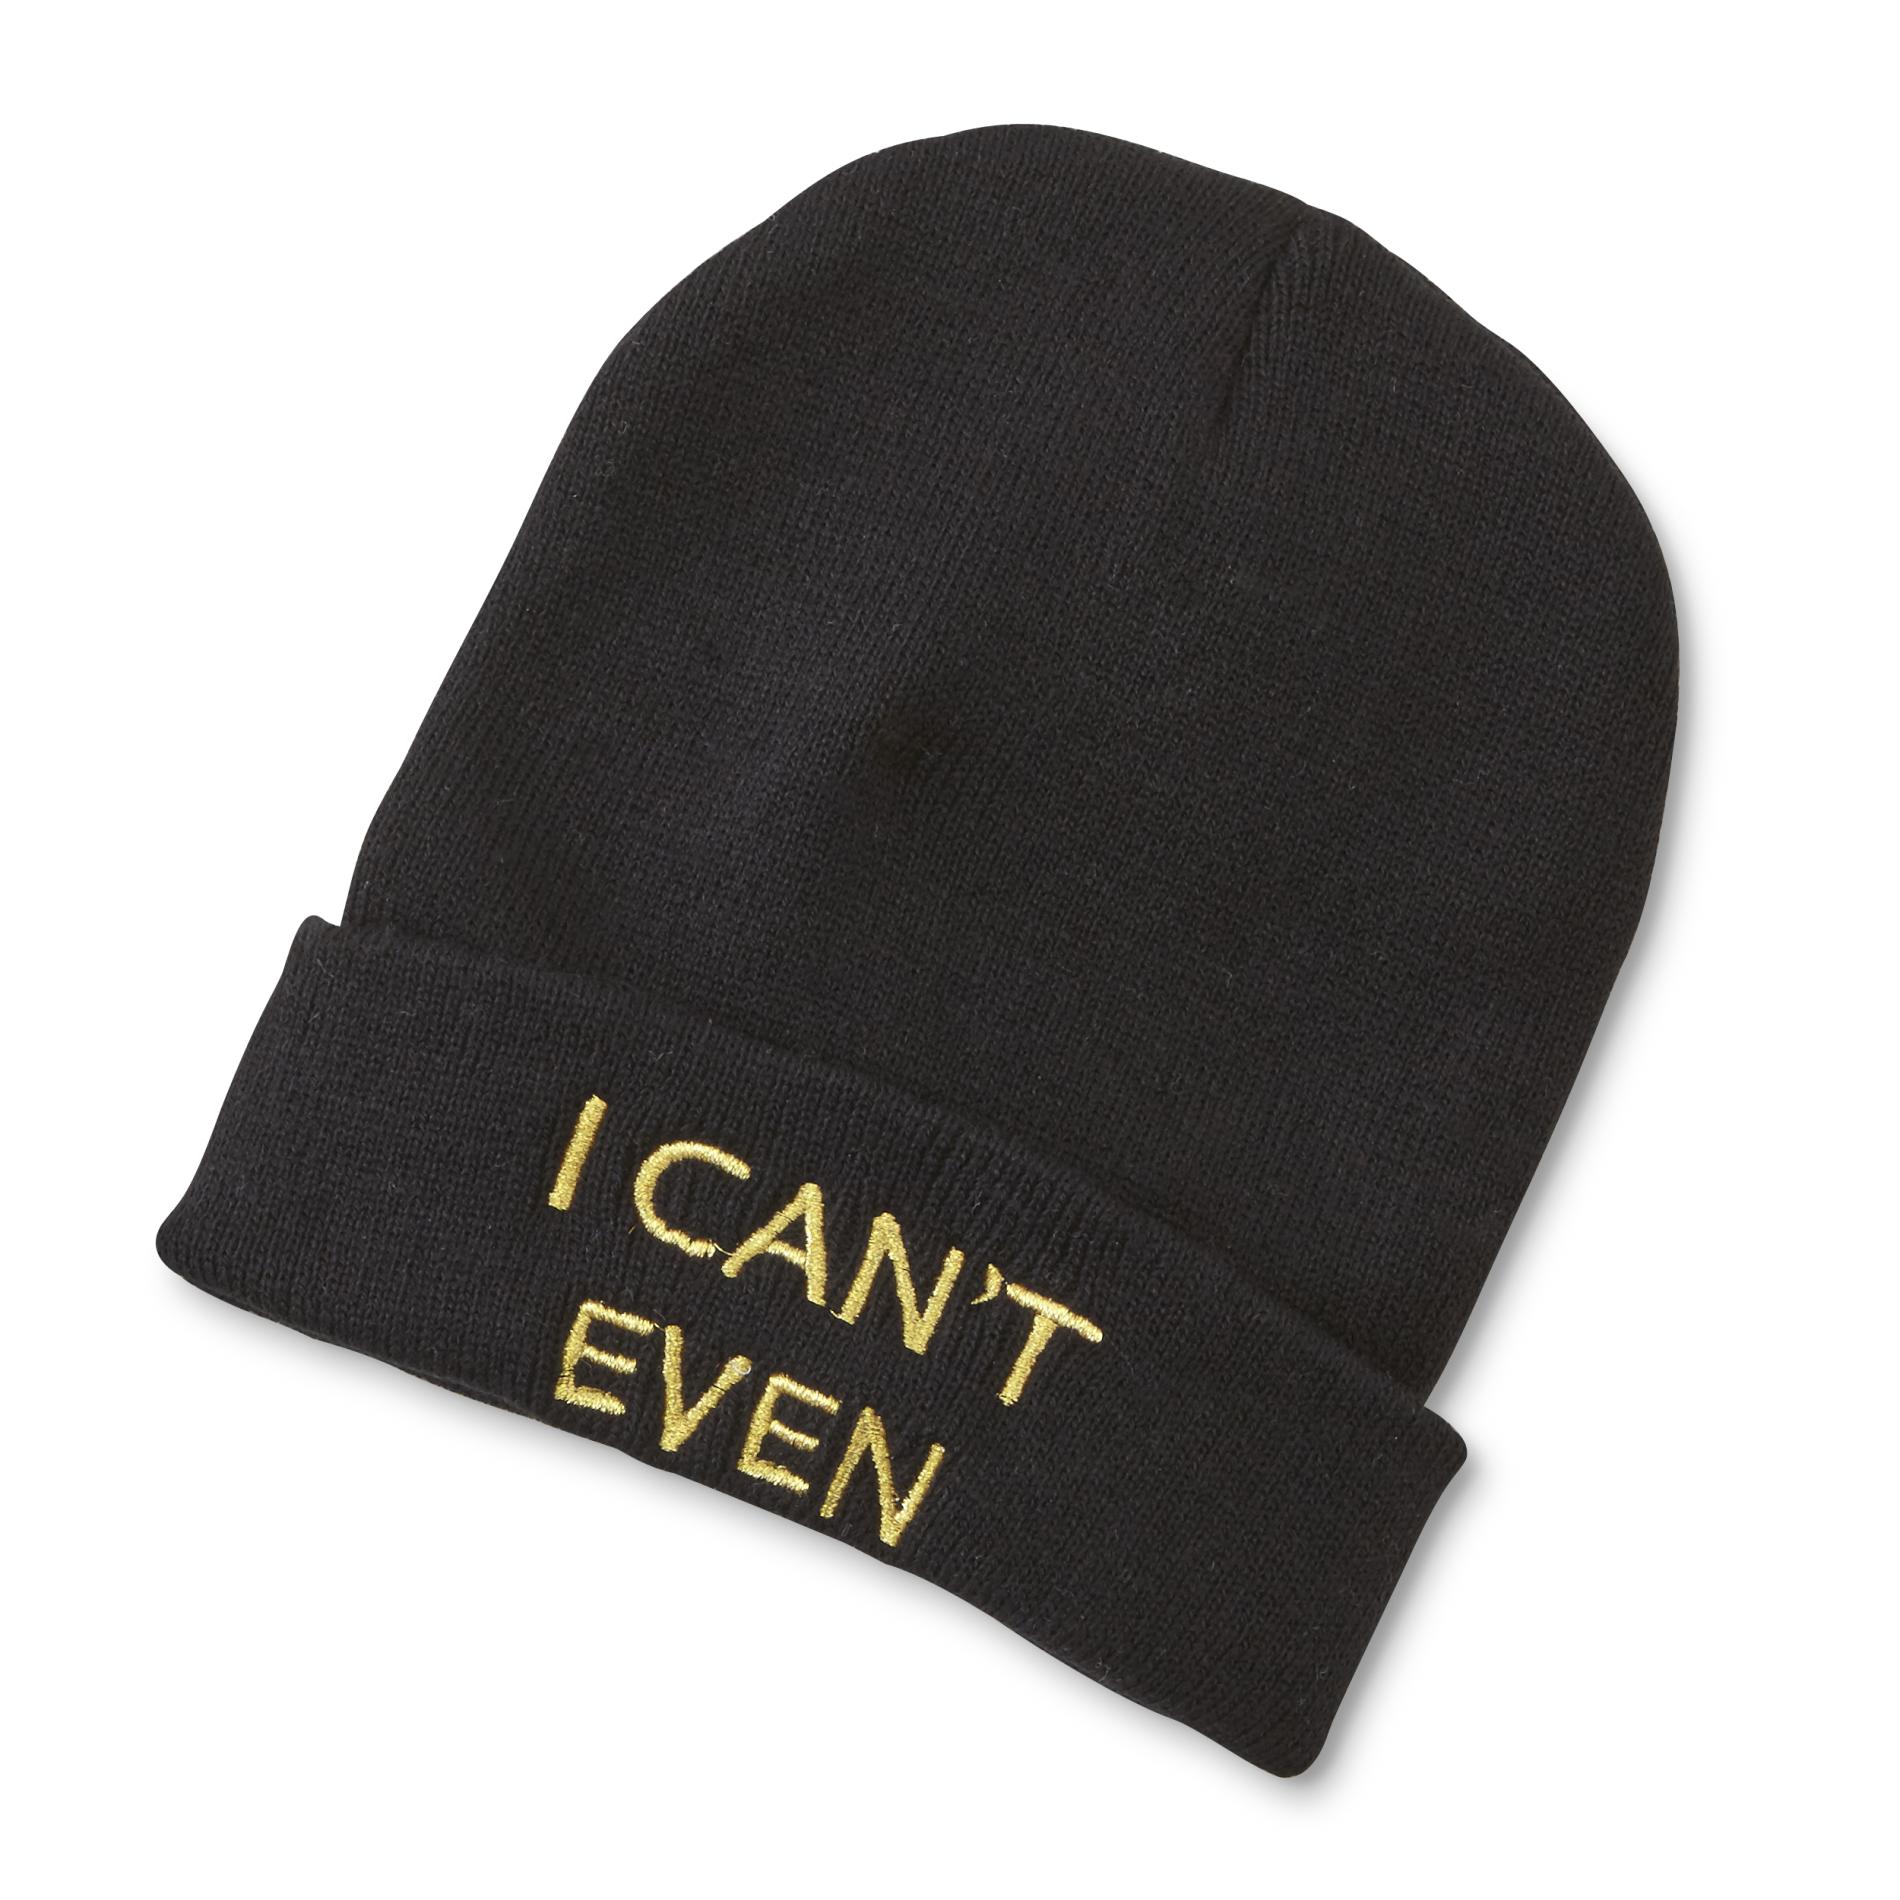 Women's Beanie Hat - I Can't Even